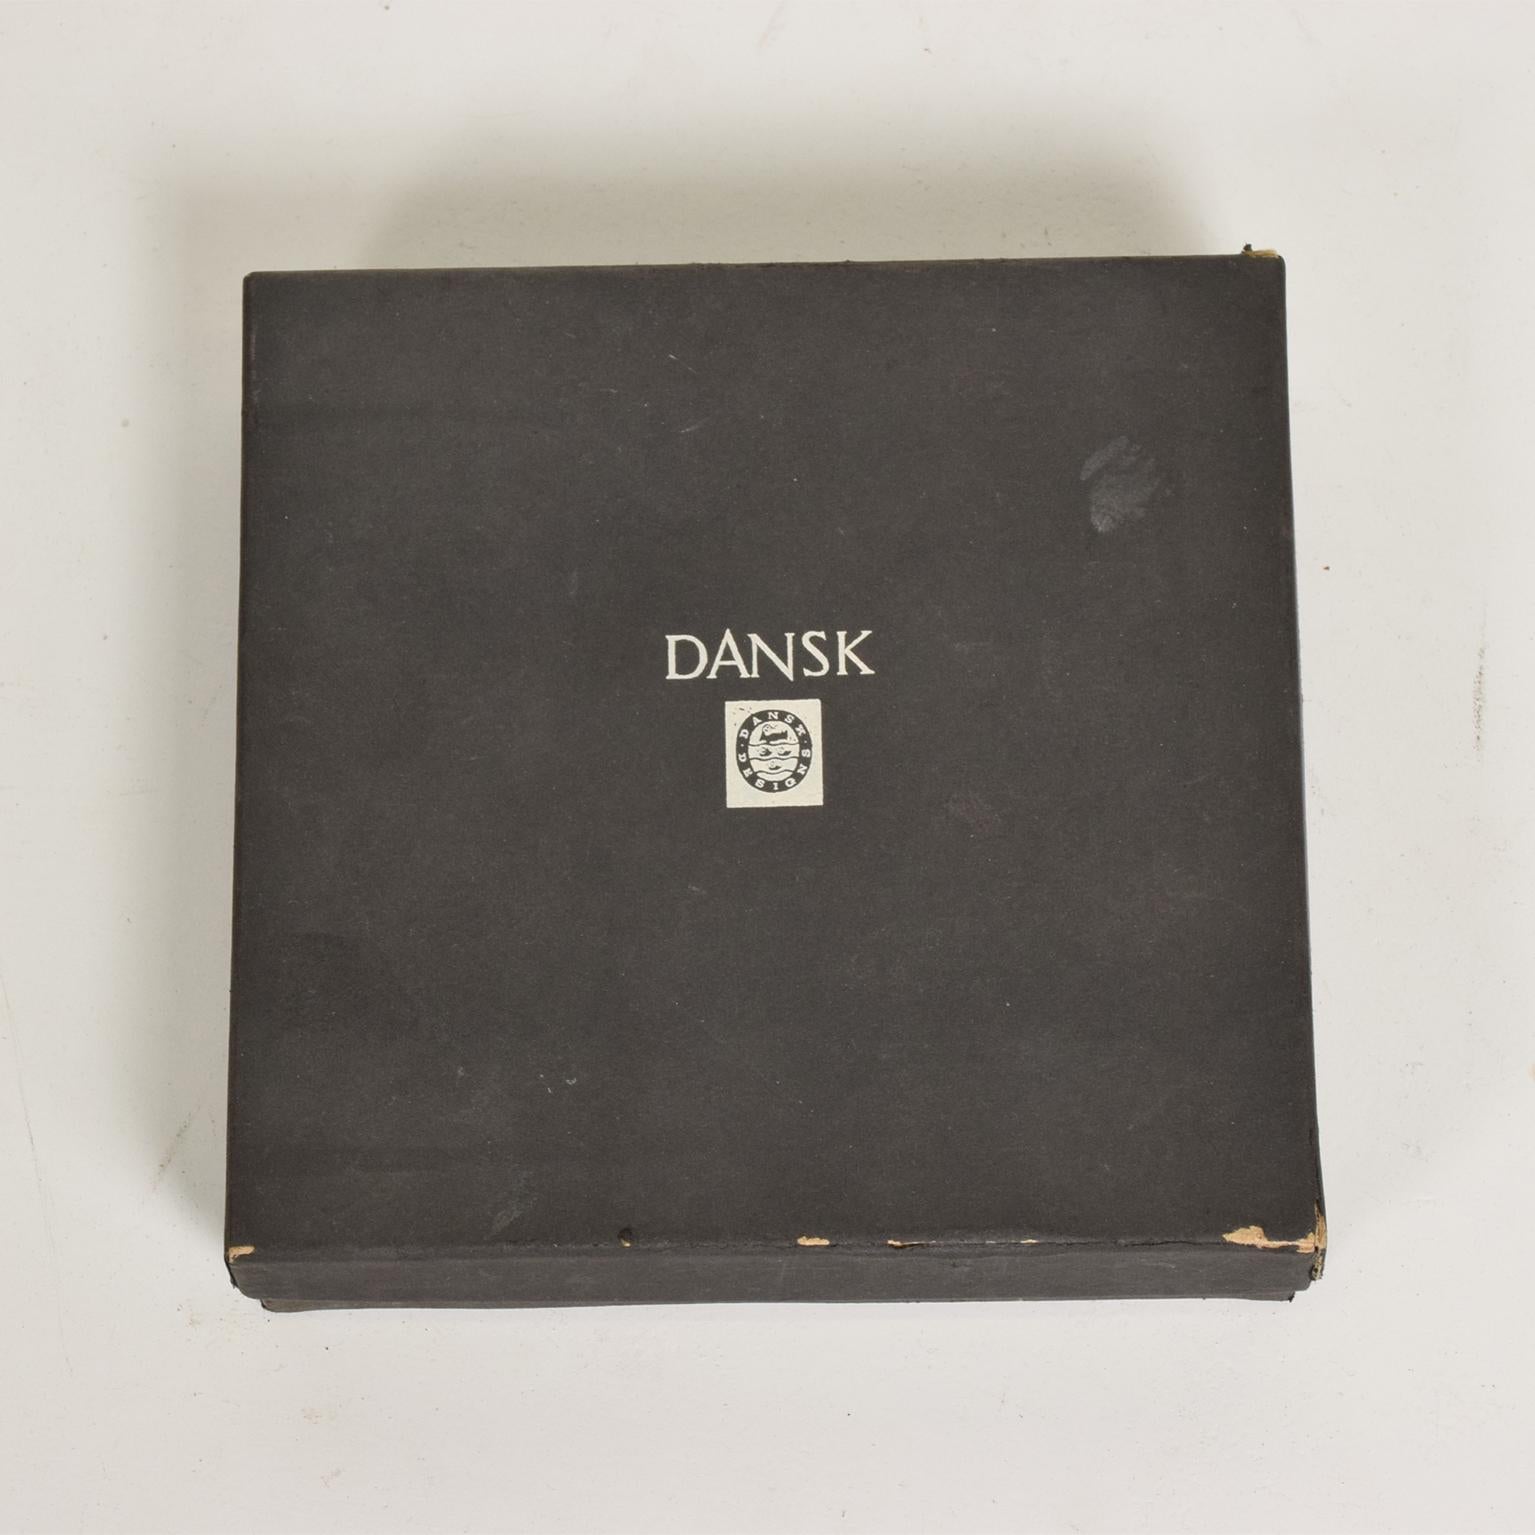 For your consideration, a vintage set of Dansk matches boxes in original packaging.

Each wooden box is made of teak with a stainless steel inlay decoration. They measure: 1 3/4